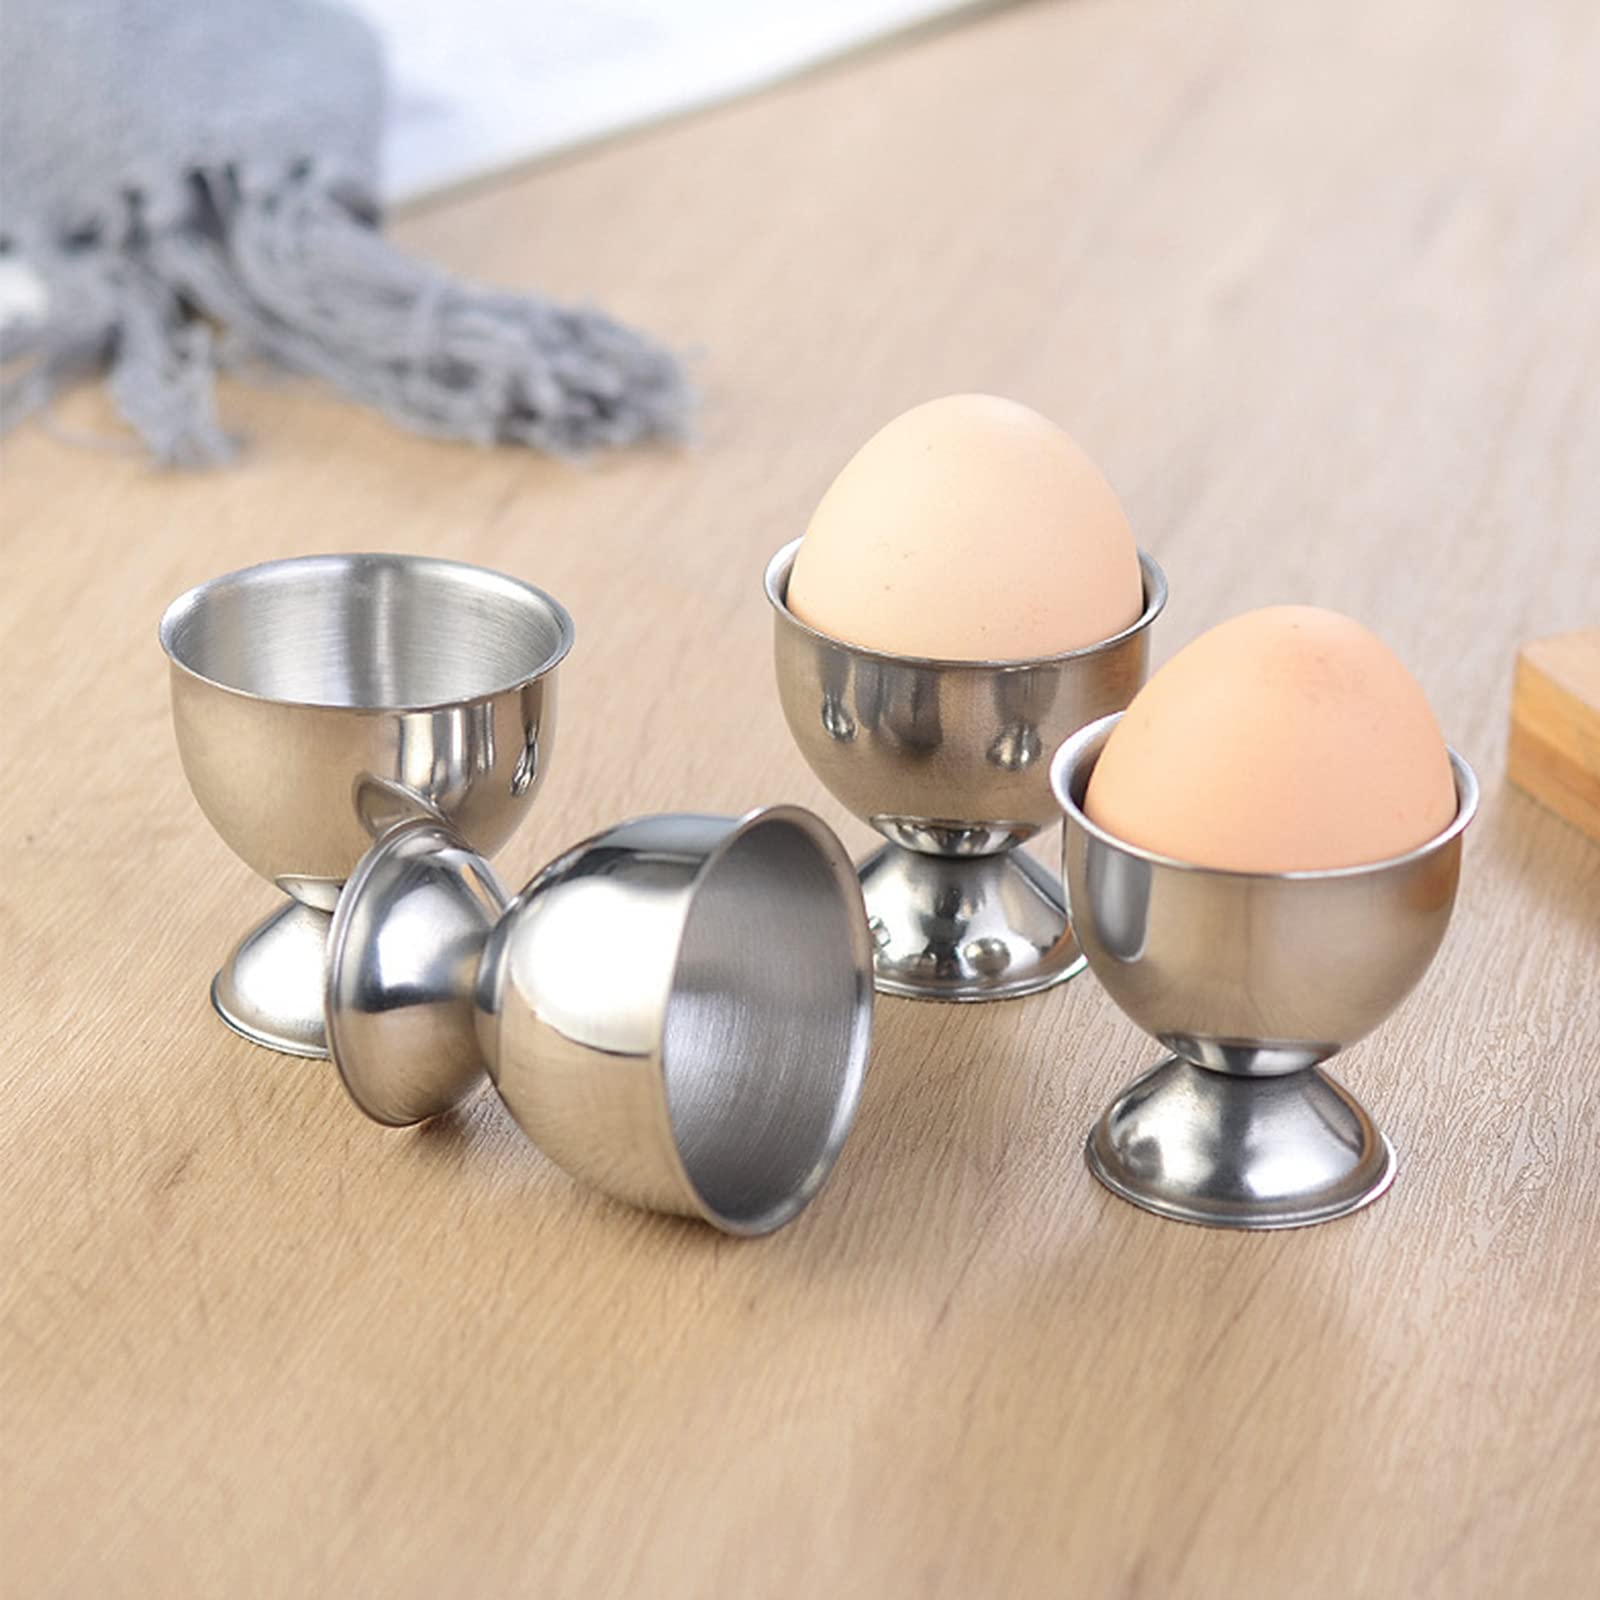 Elsjoy 8 Pack Egg Cup Holders with 8 Spoons, Stainless Steel Egg Cups Set for Soft & Hard Boiled Eggs, Kitchen Tools, Breakfast